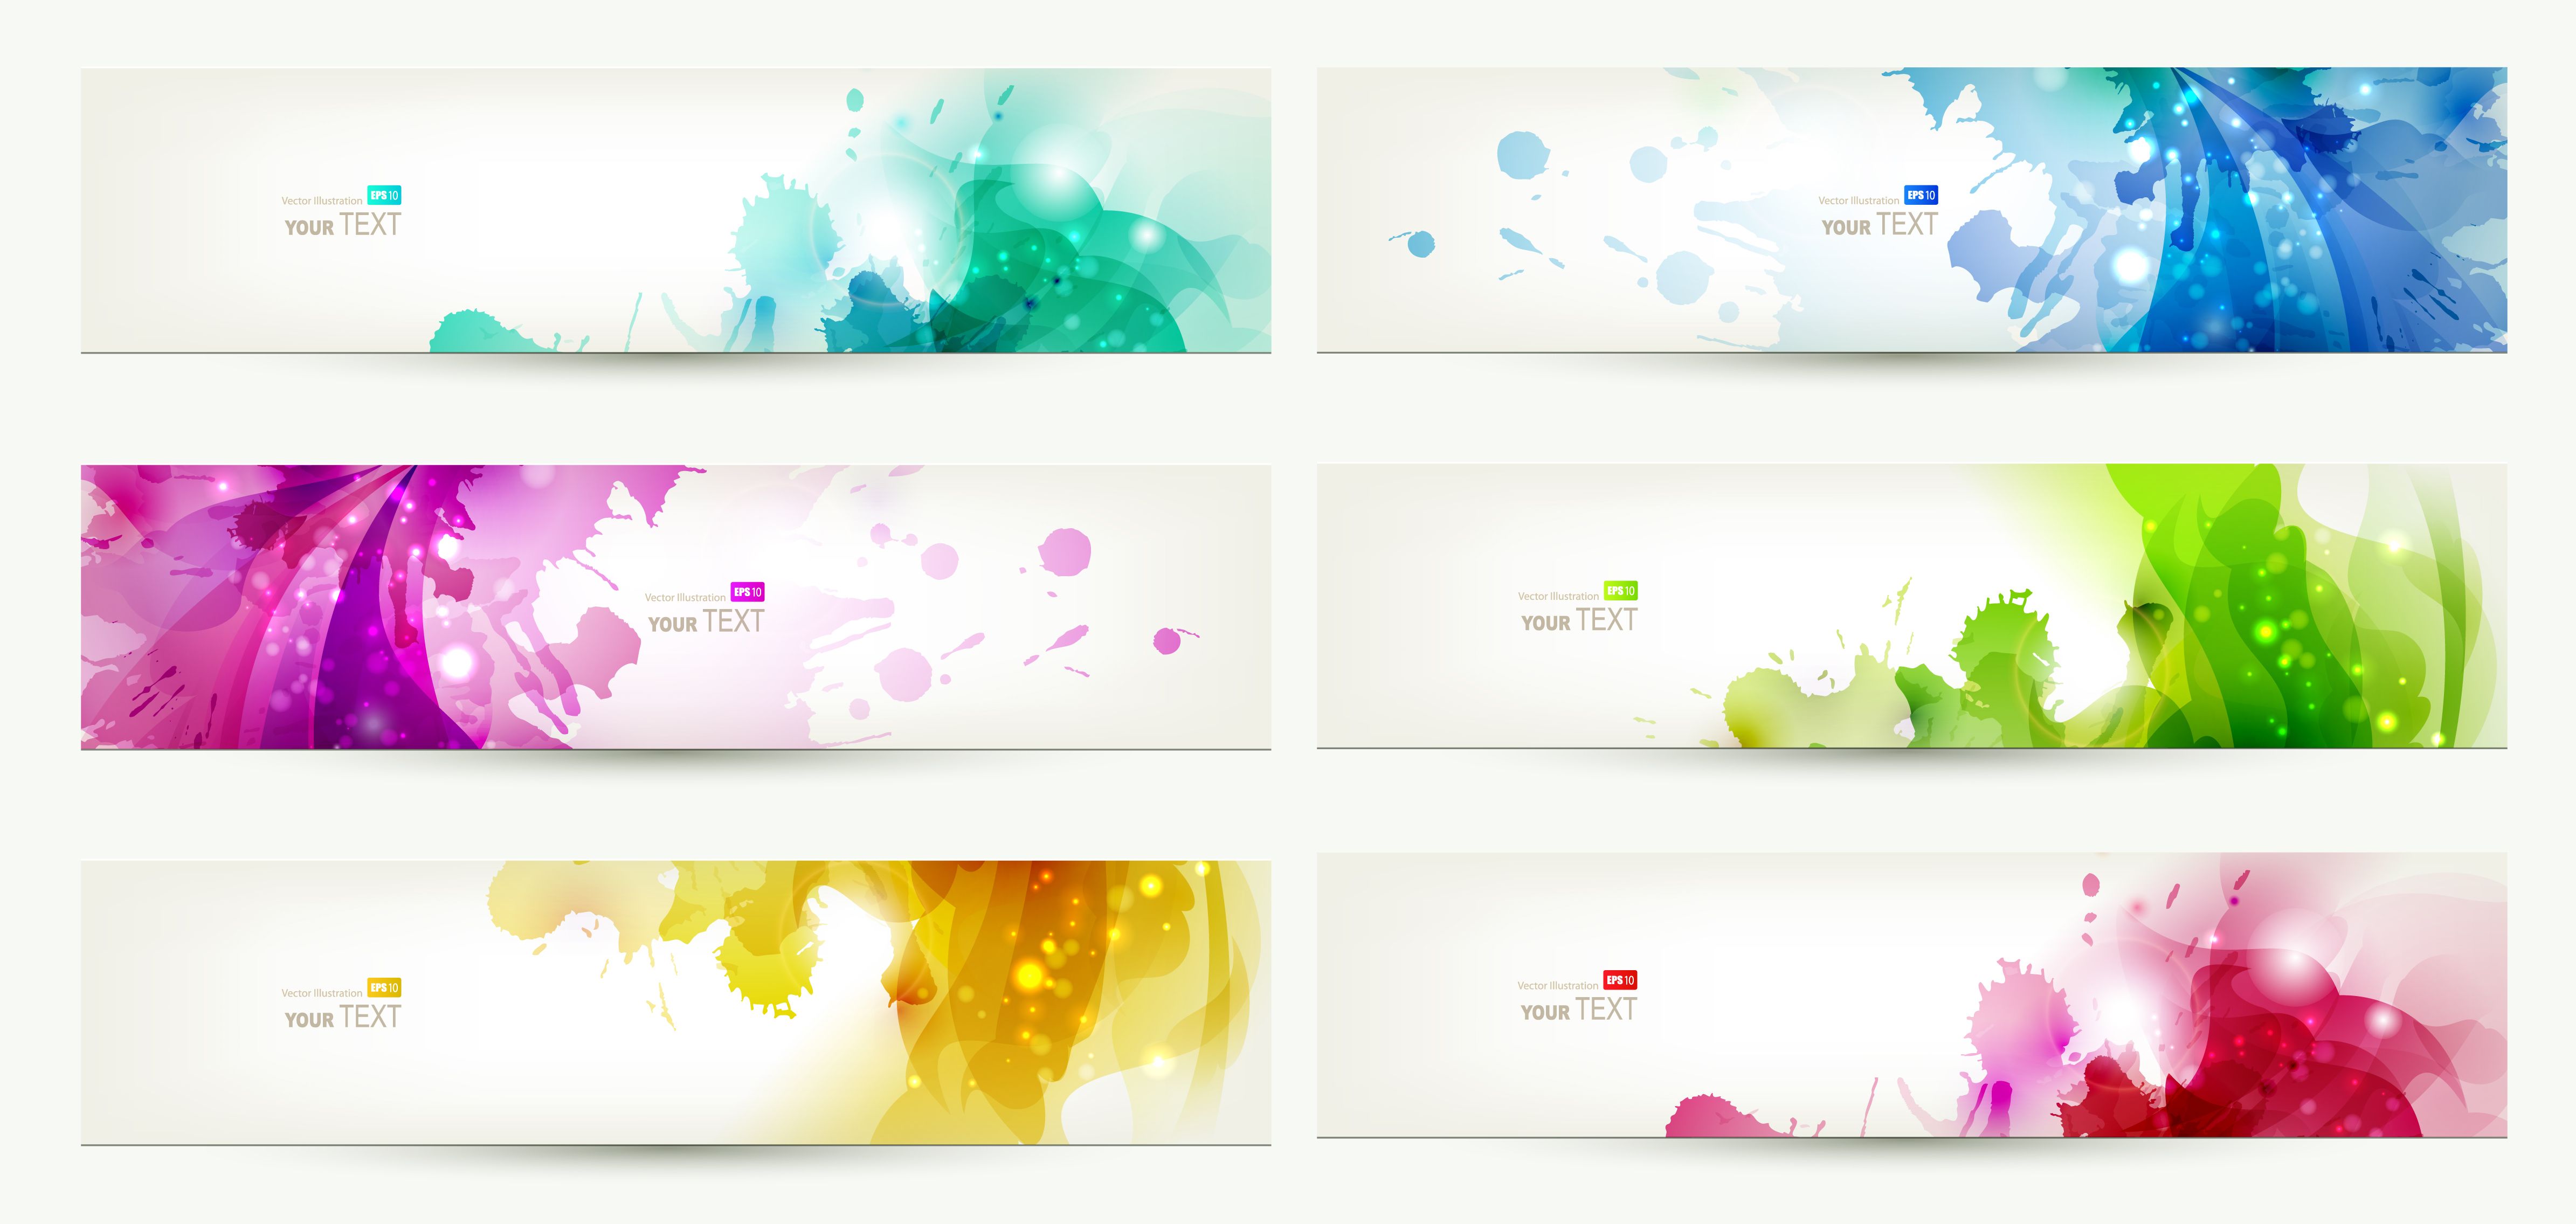 creative-banner-design-psd-free-download-imagesee